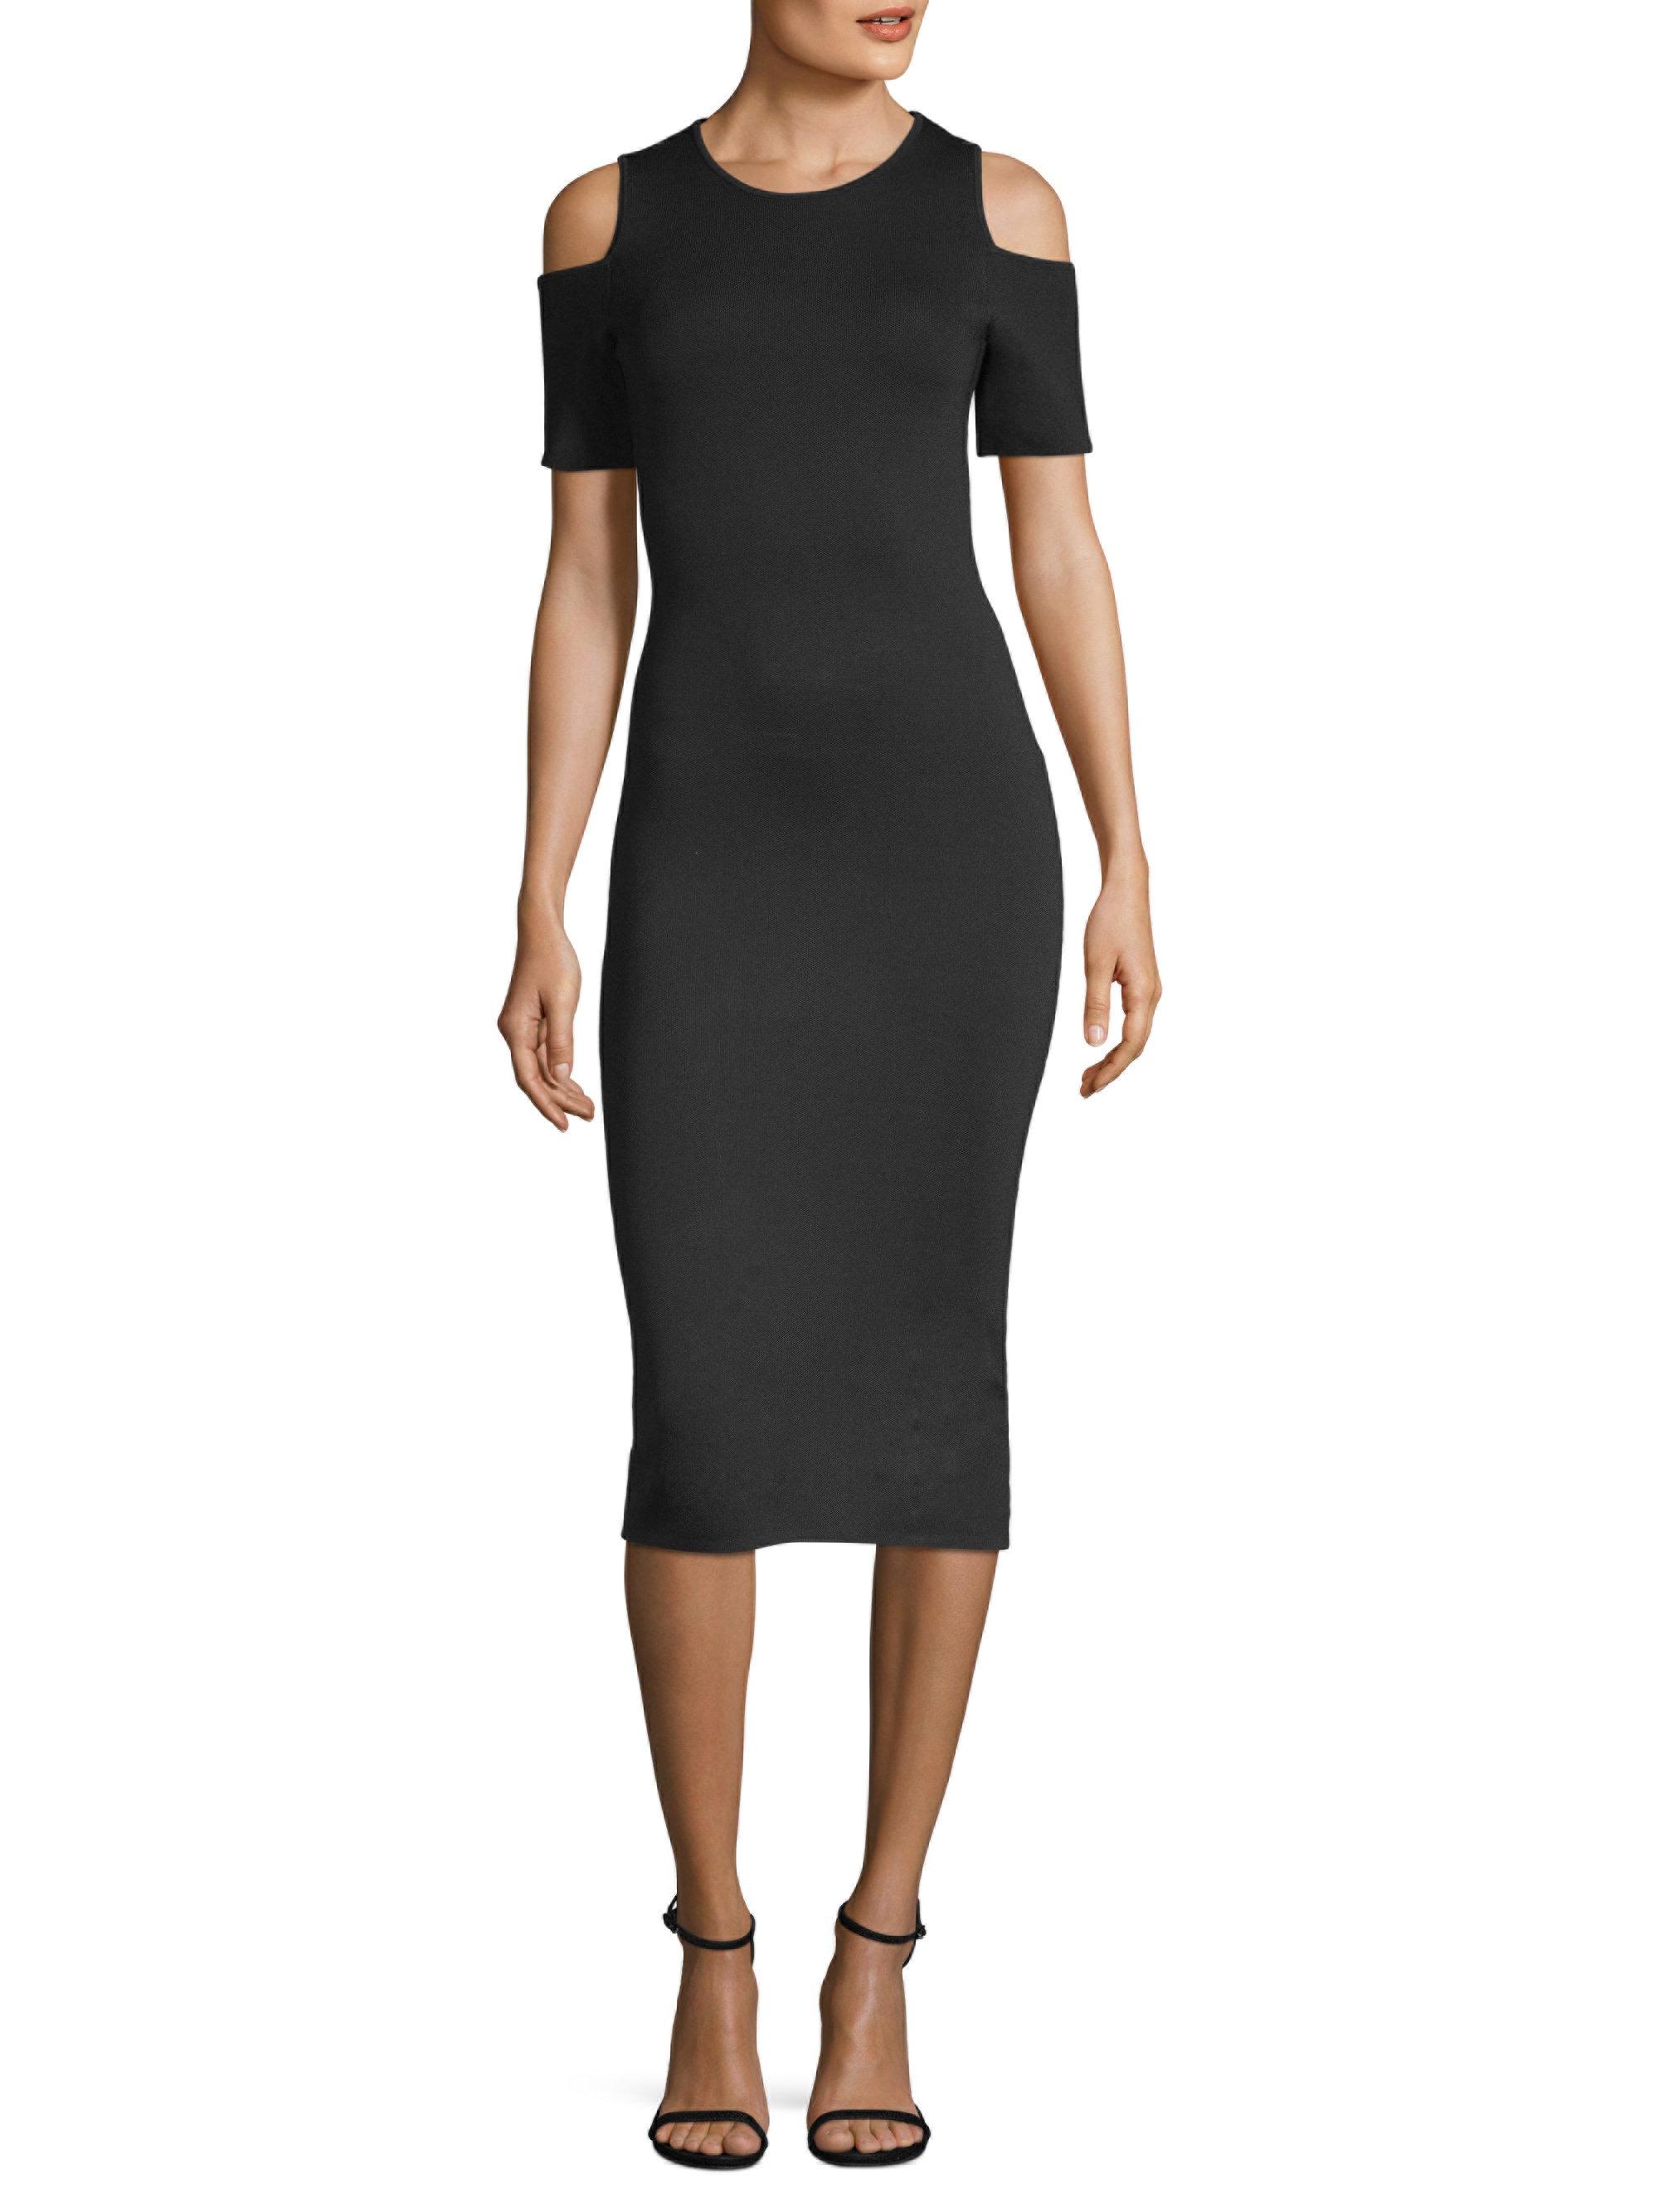 MICHAEL Michael Kors Synthetic Cold Shoulder Bodycon Dress in Black - Lyst